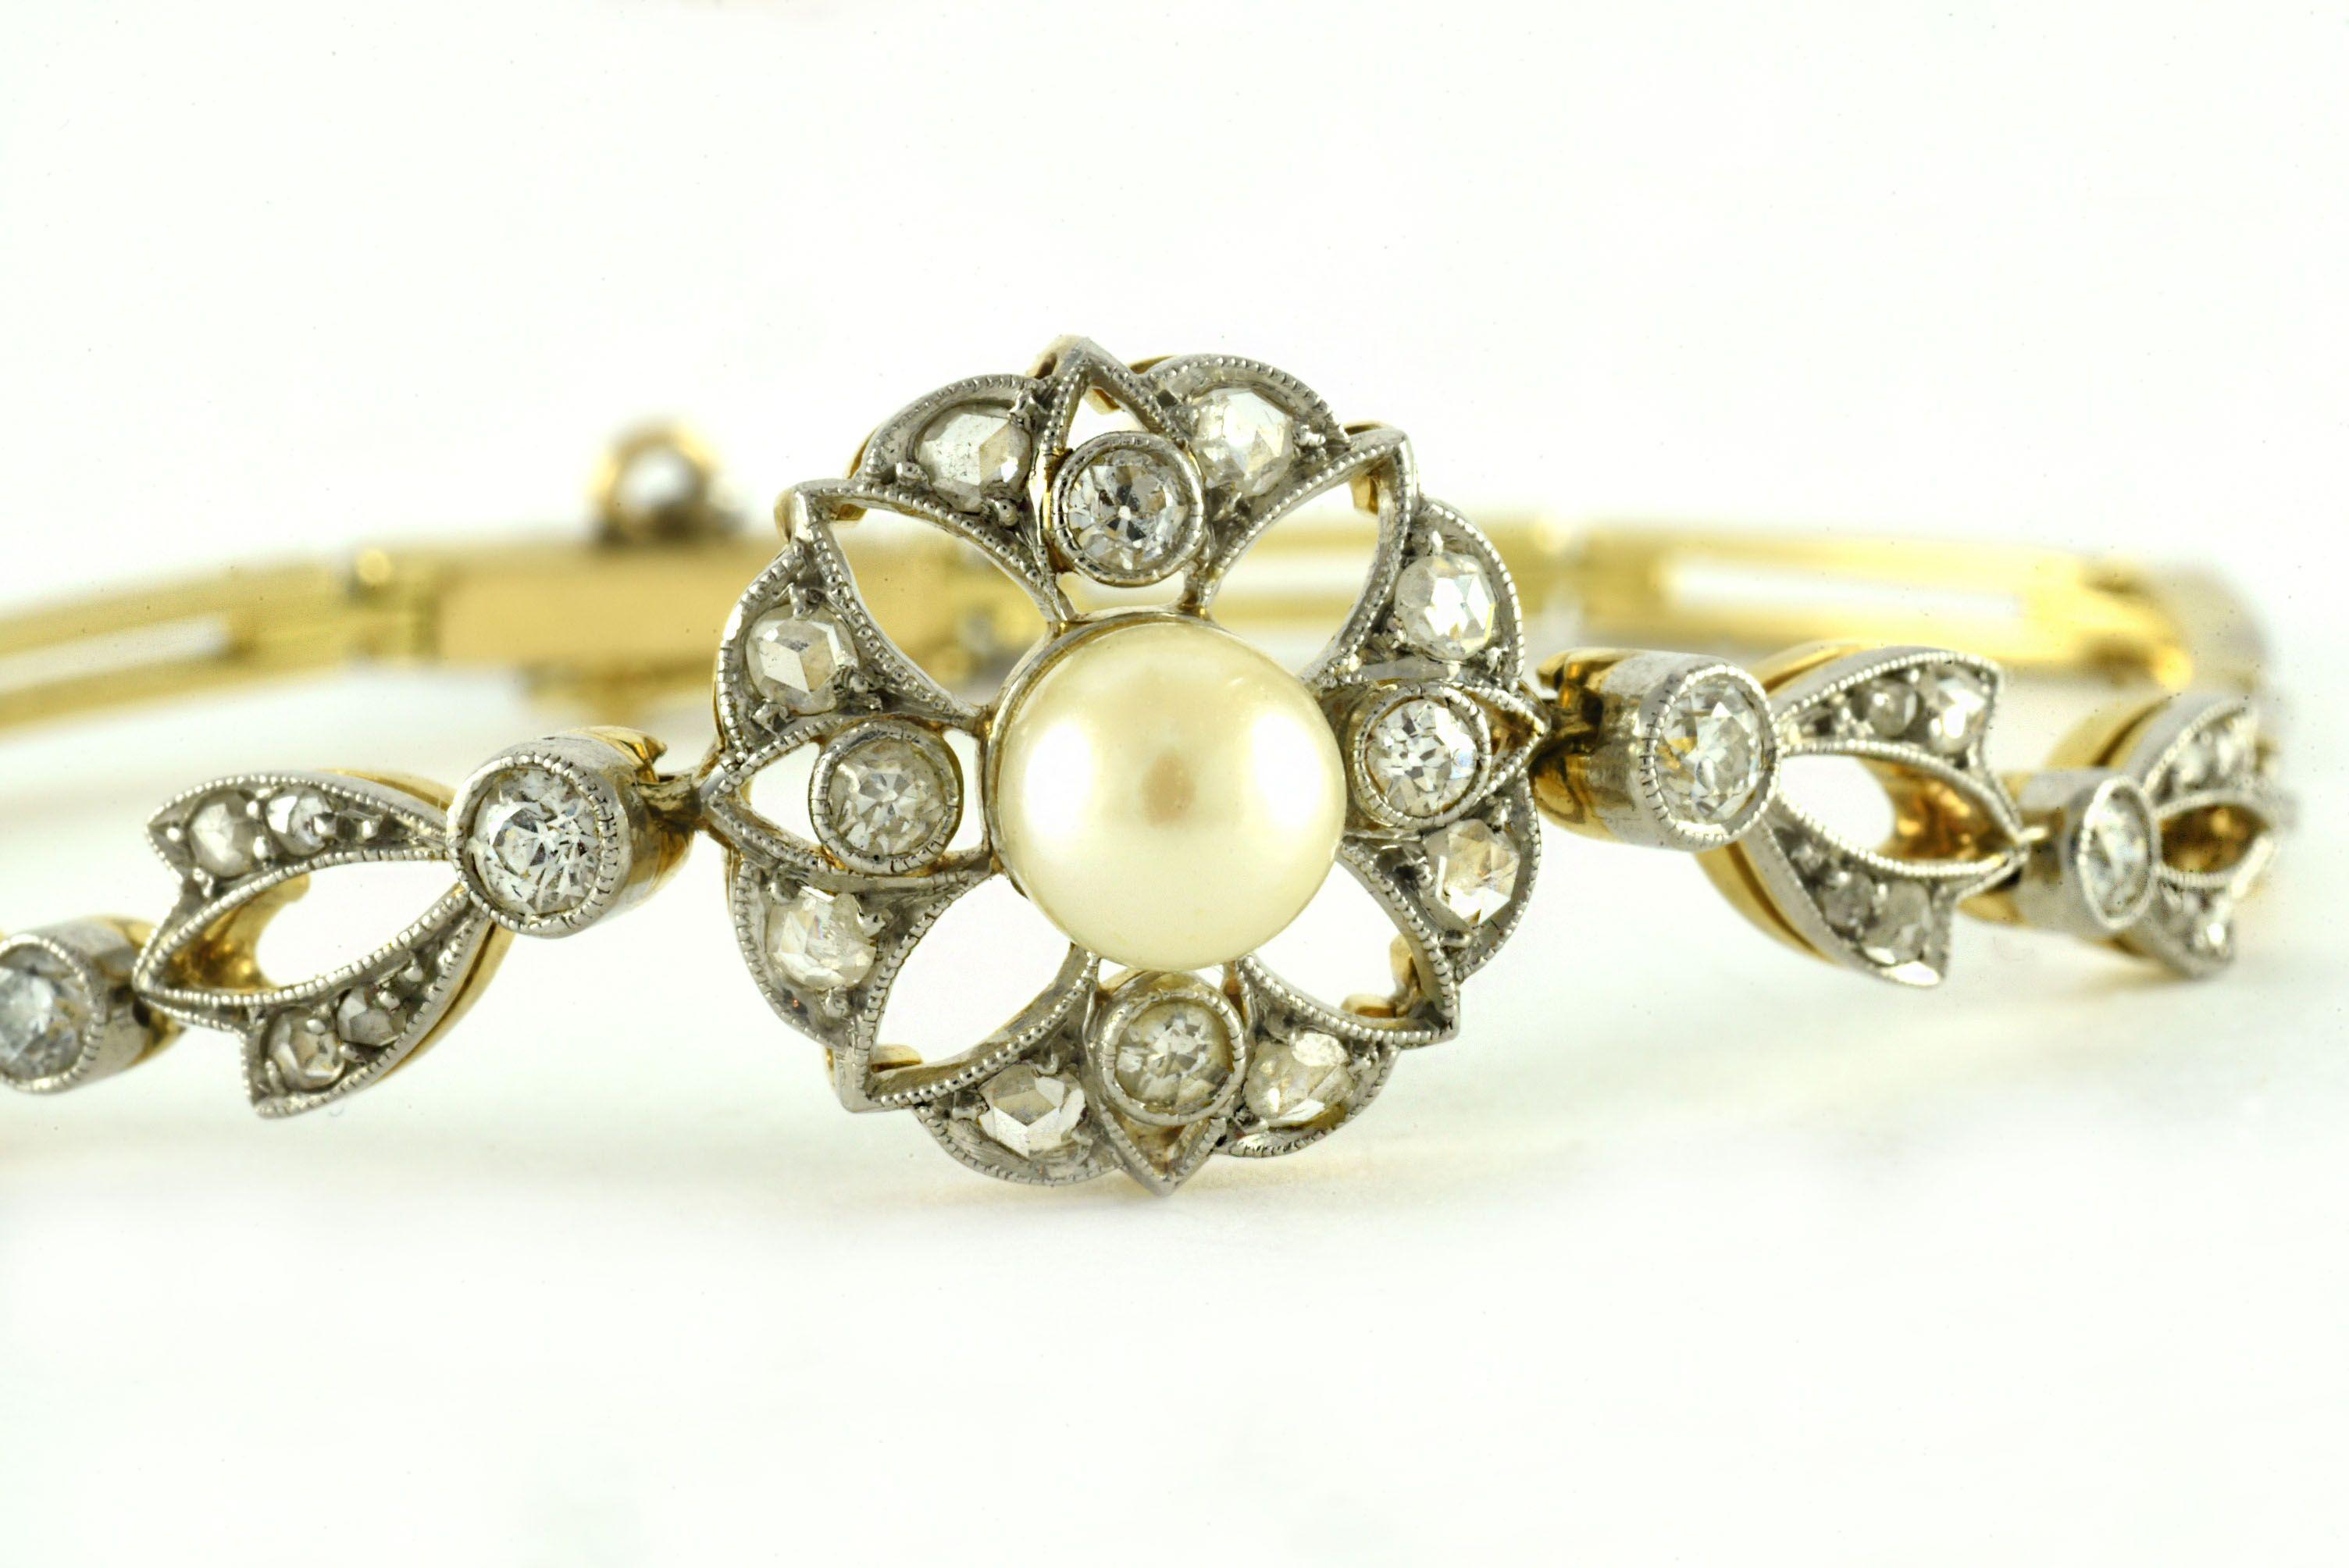 This delicate Edwardian era bracelet is designed around a single white pearl measuring 5.37mm surrounded by a mix of eight Old European and Old Mine cut diamonds totaling 0.47 carats, F-G color, VS-SI1 clarity in a floral surround and accented by